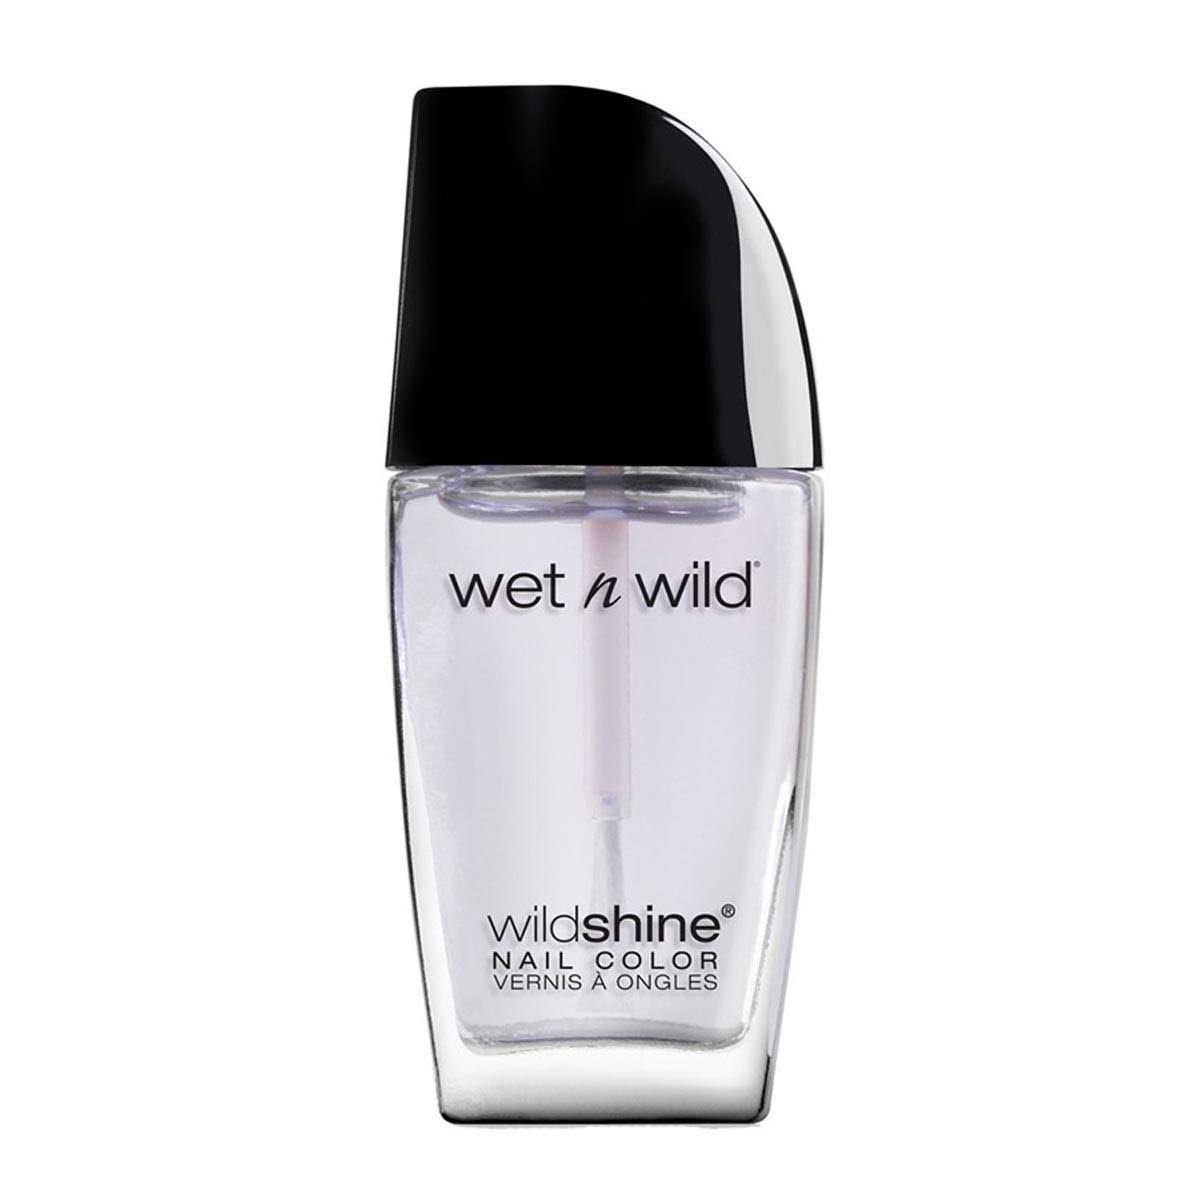 Wet N Wild Wildshine Nail Color Protective Base Coat